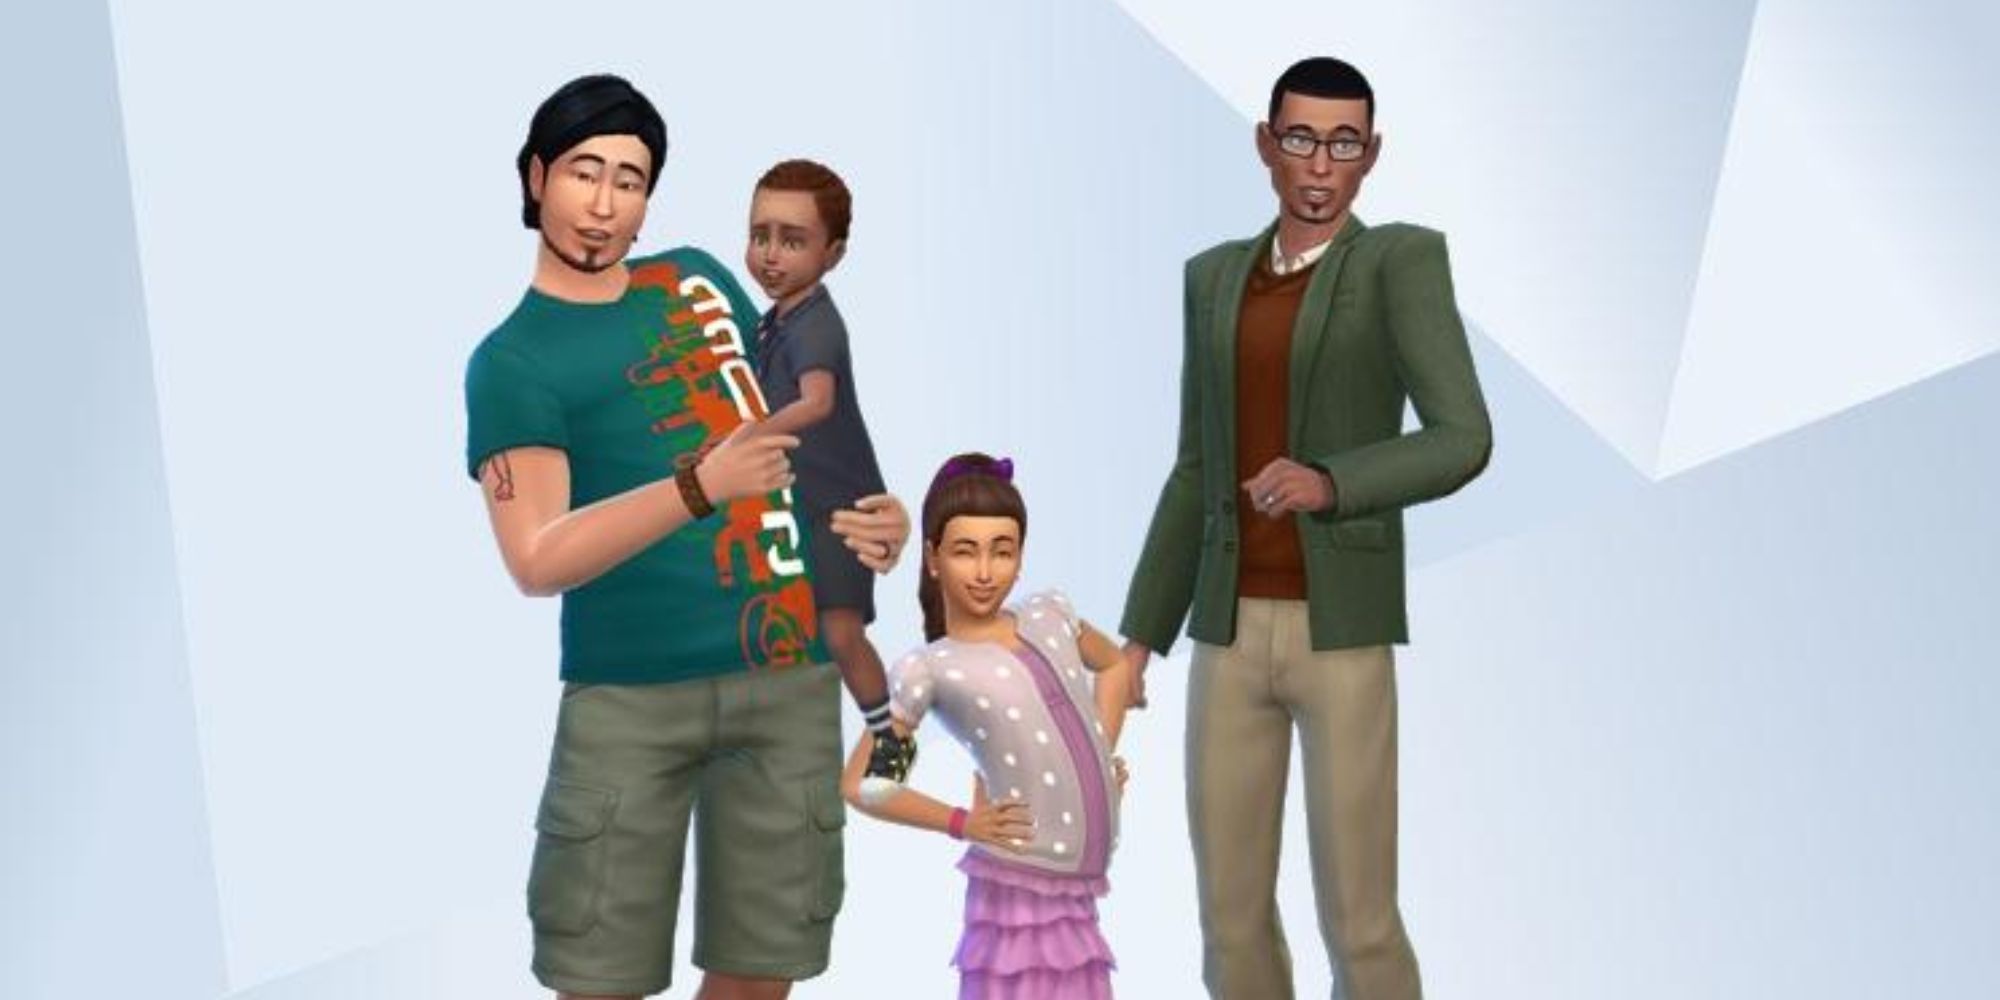 The Sims 4 Household Photo